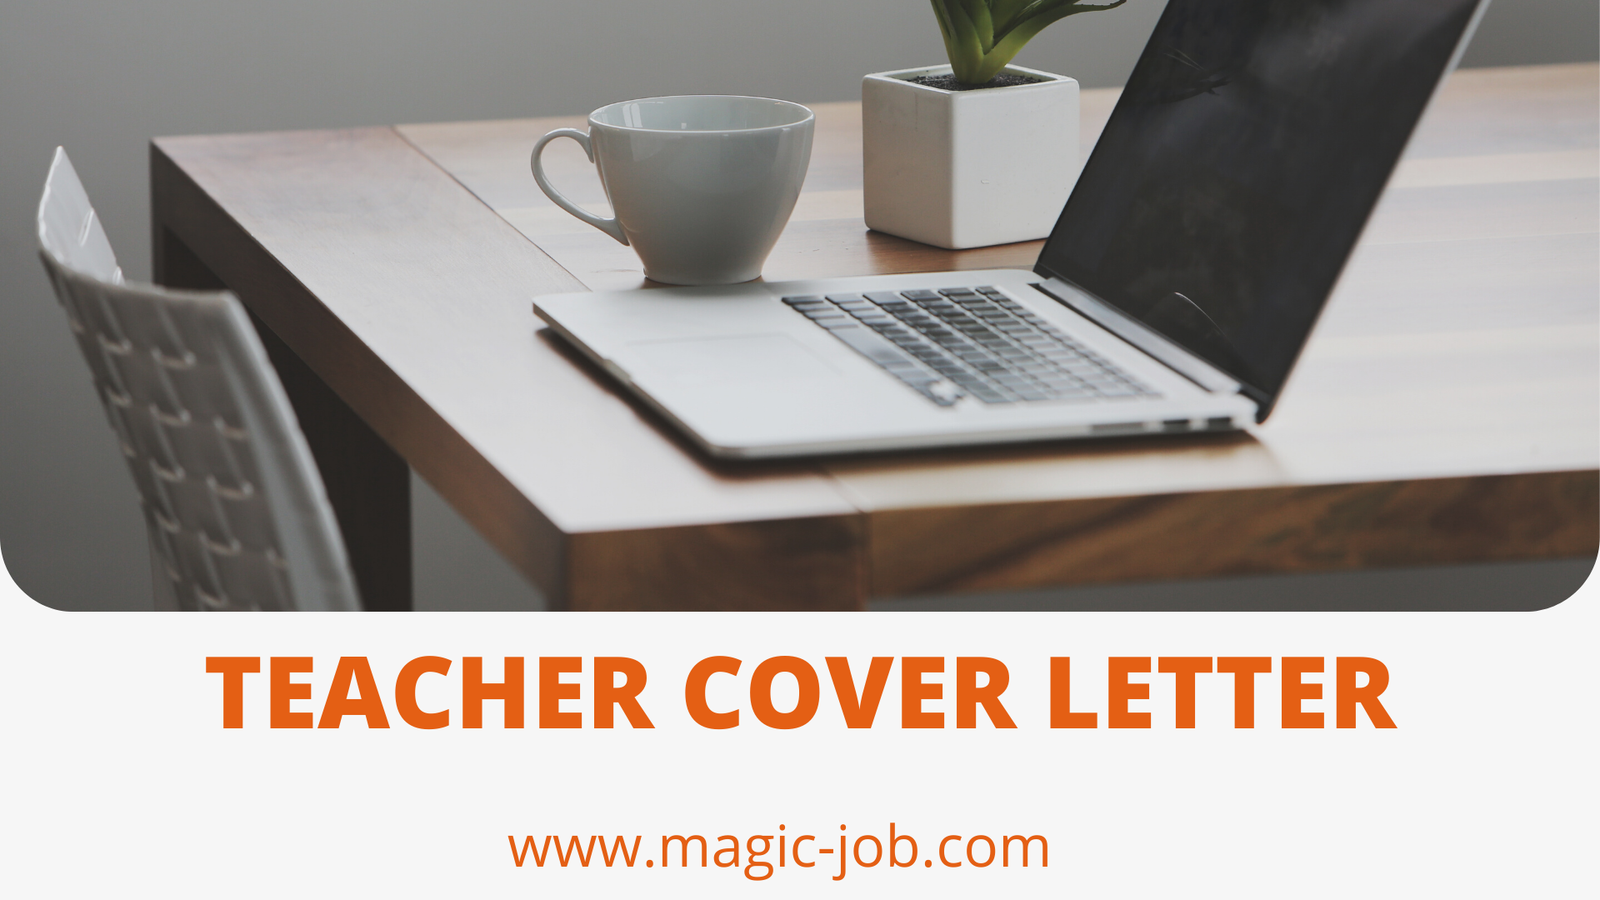 cover letter, online jobs, work from home, remote work, jobs, jobs near me, flexible work